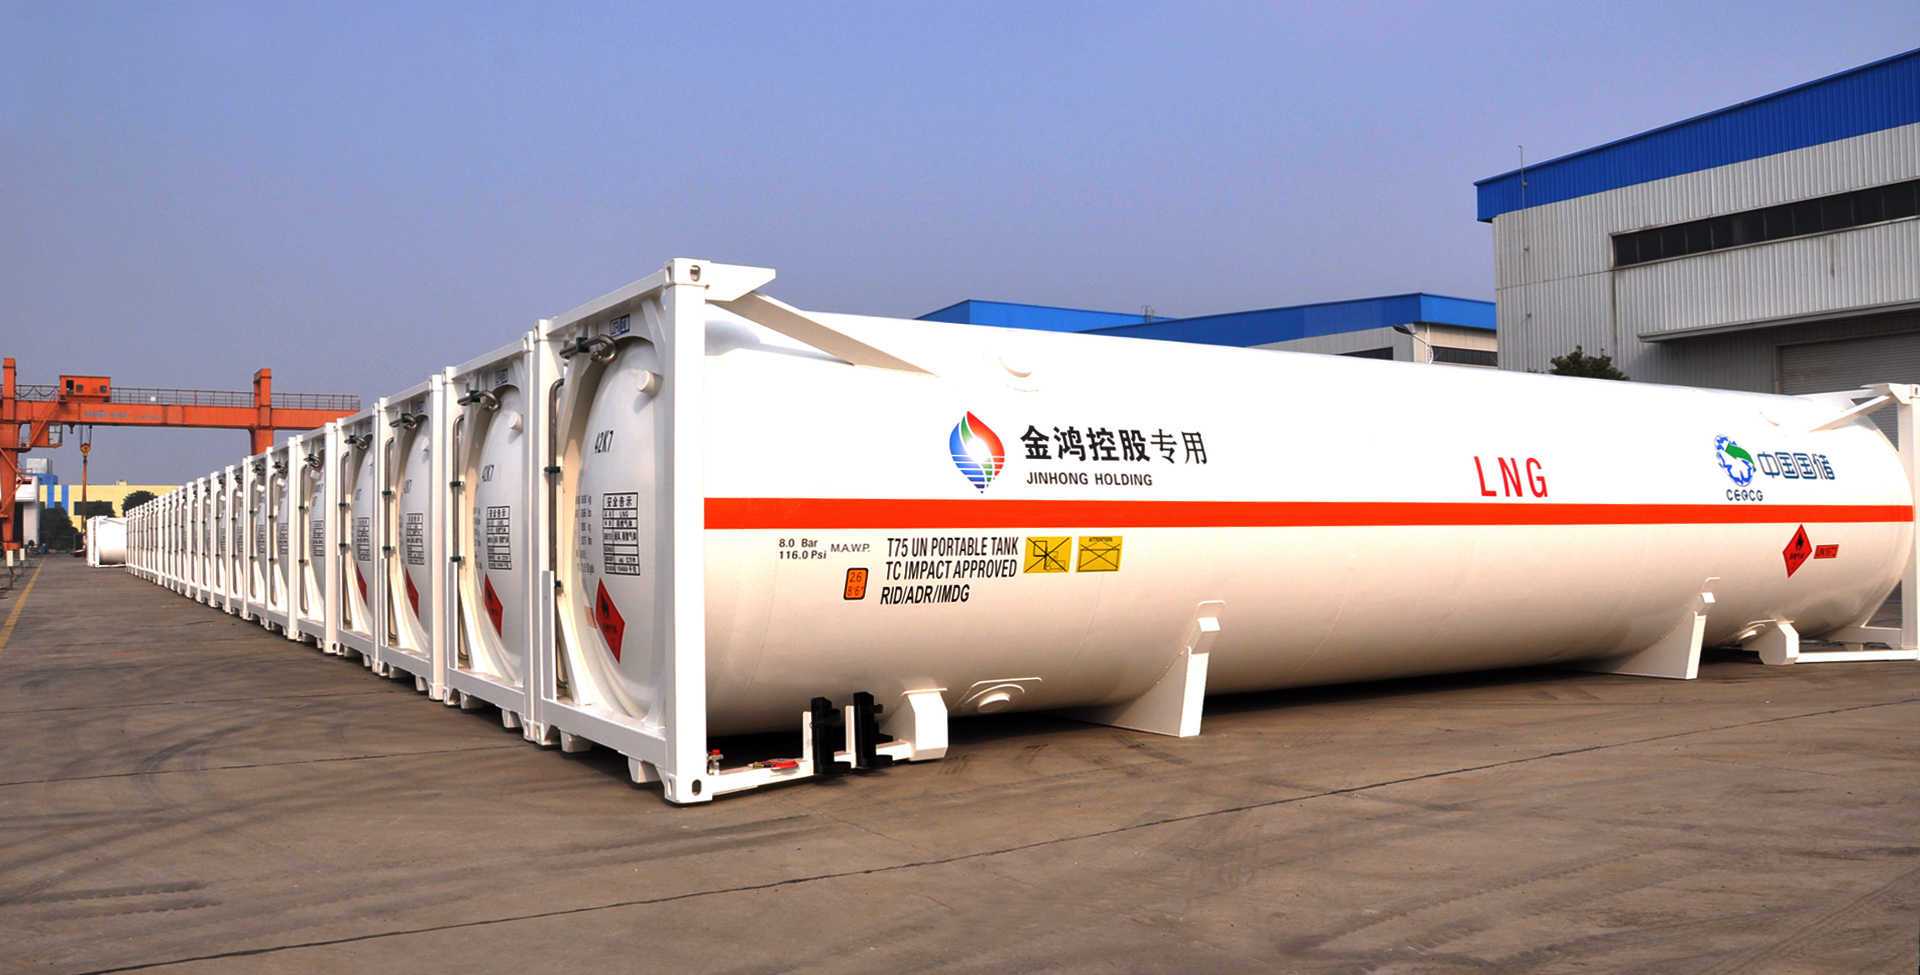 To be a high-quality supplier of chemical storage and transportation equipment